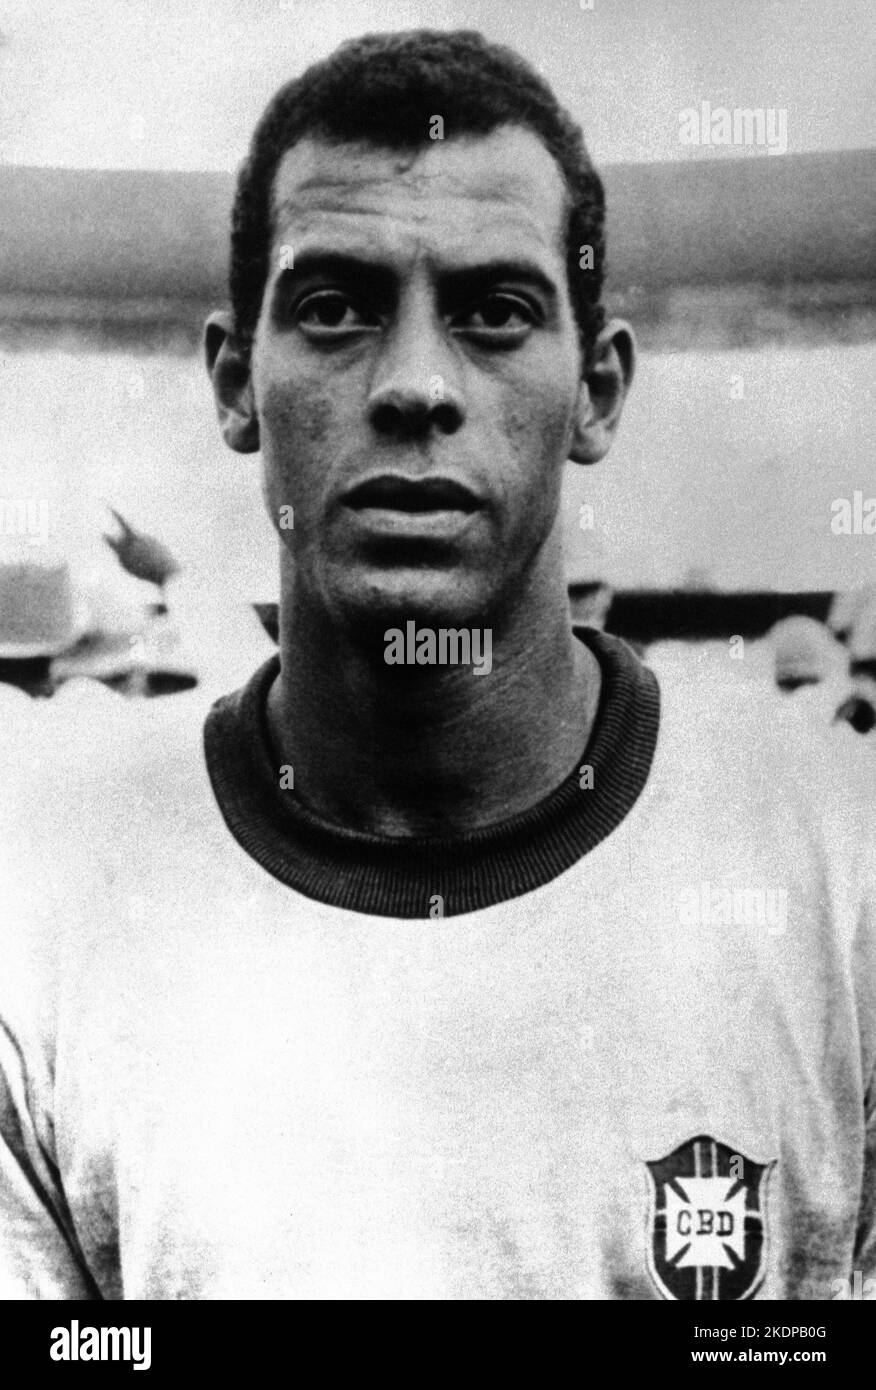 File photo dated 20-06-1970 of Brazilian footballer Carlos Alberto. Roving right-back Alberto scored one of the most memorable goals in the history of the World Cup. It was his powerful angled drive, completing a brilliant team move, which sealed Brazil's 4-1 win over Italy in the 1970 final at the Azteca Stadium. Issue date: Tuesday November 8, 2022. Stock Photo